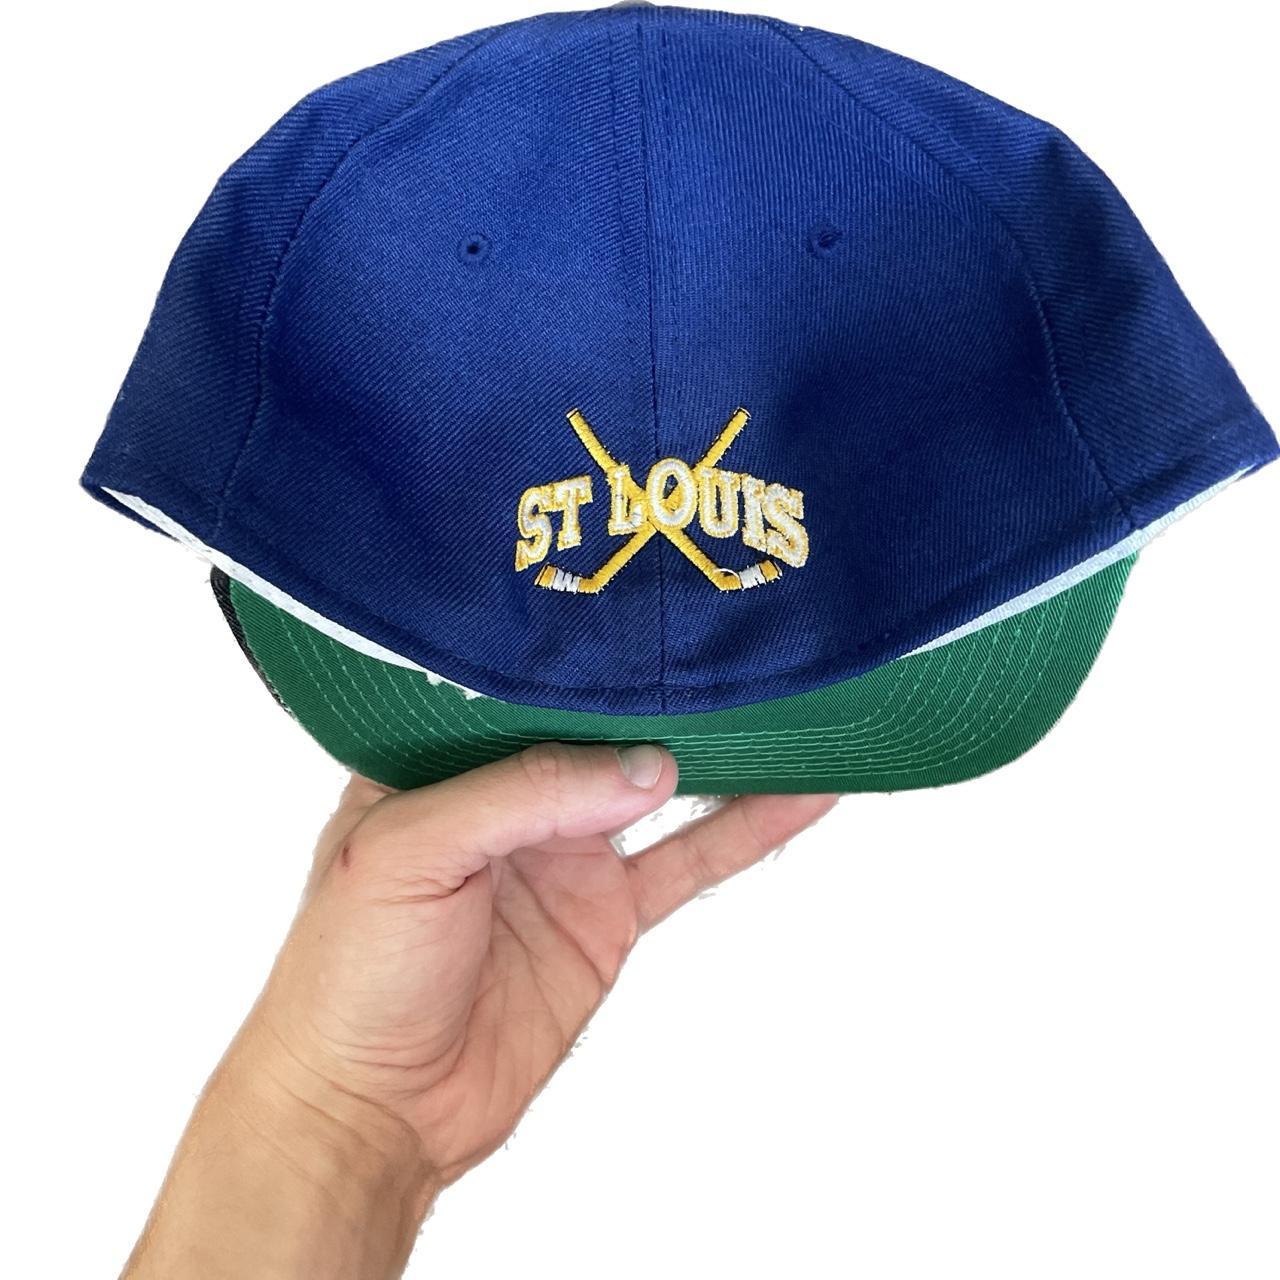 Vintage Sports Specialties NHL St Louis Blues Fitted Hat NWT New Size 6 5/8